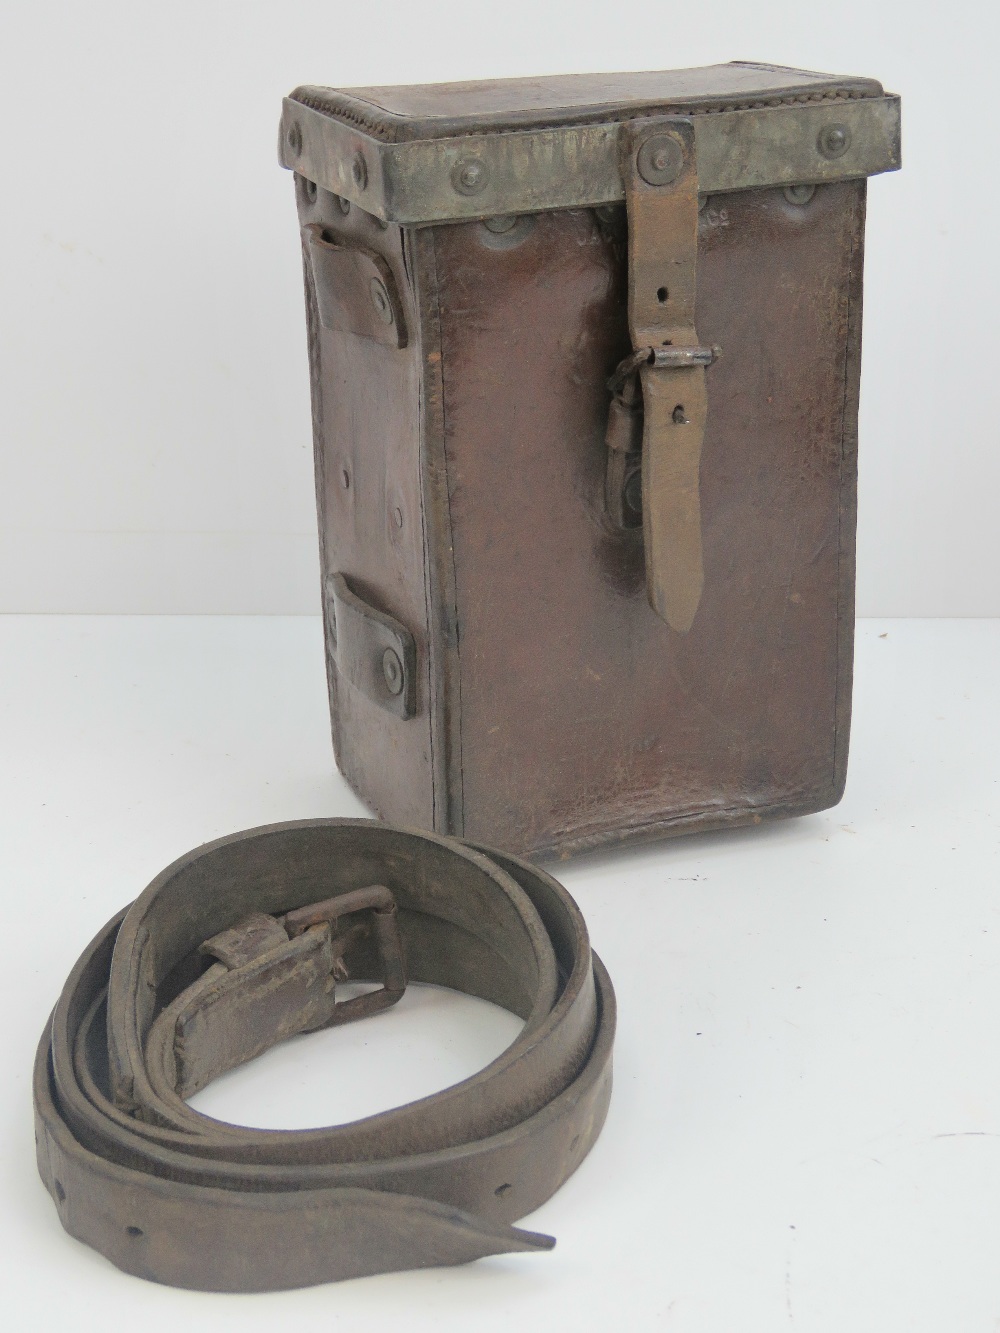 A WWI British Military Vickers gun spares/sight gunners pouch with adjustable leather strap and